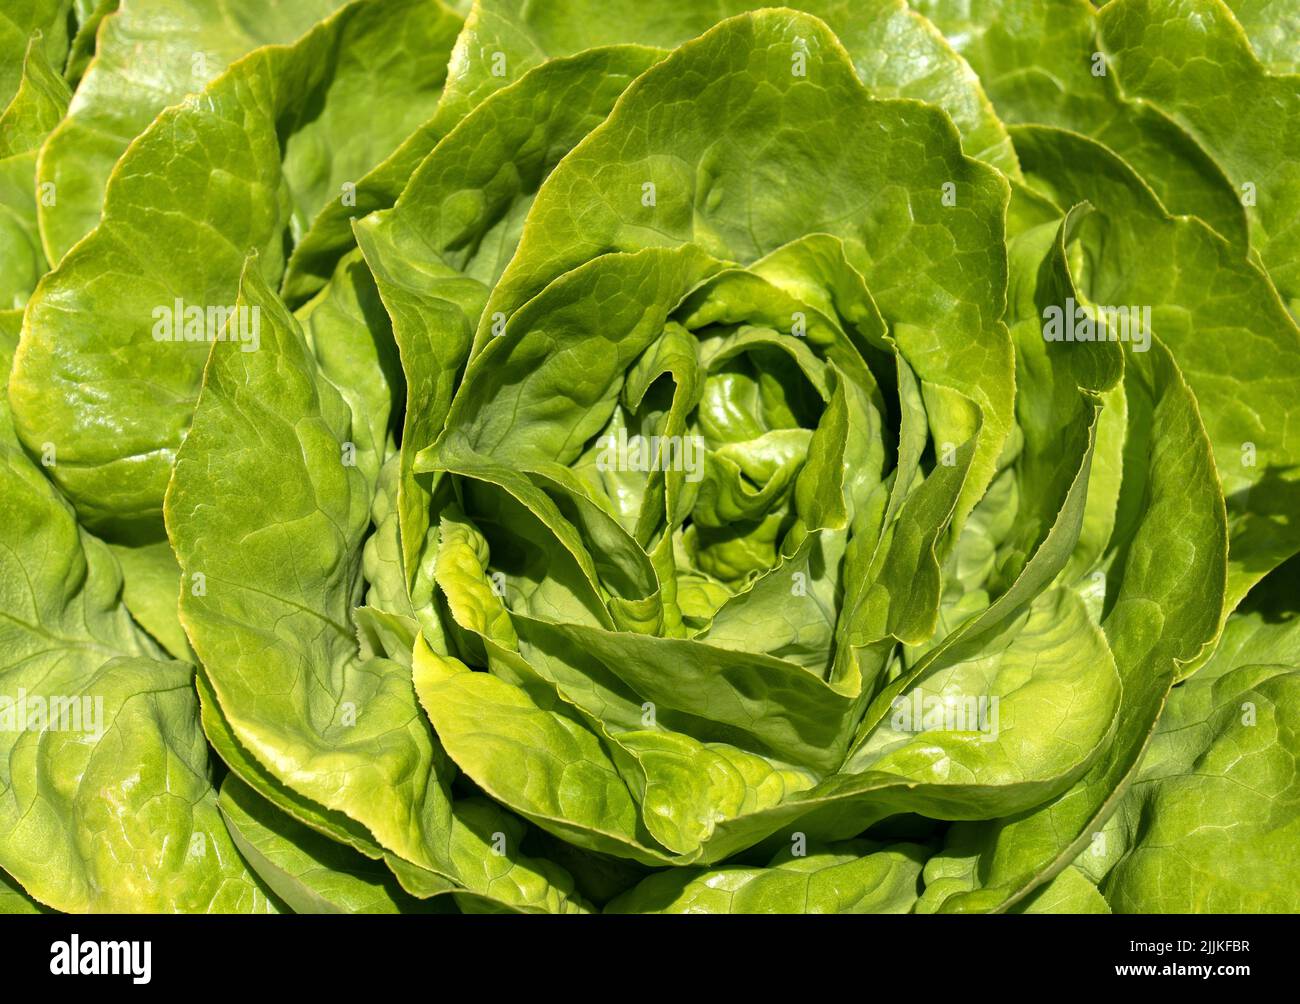 Green lettuce in close-up Stock Photo